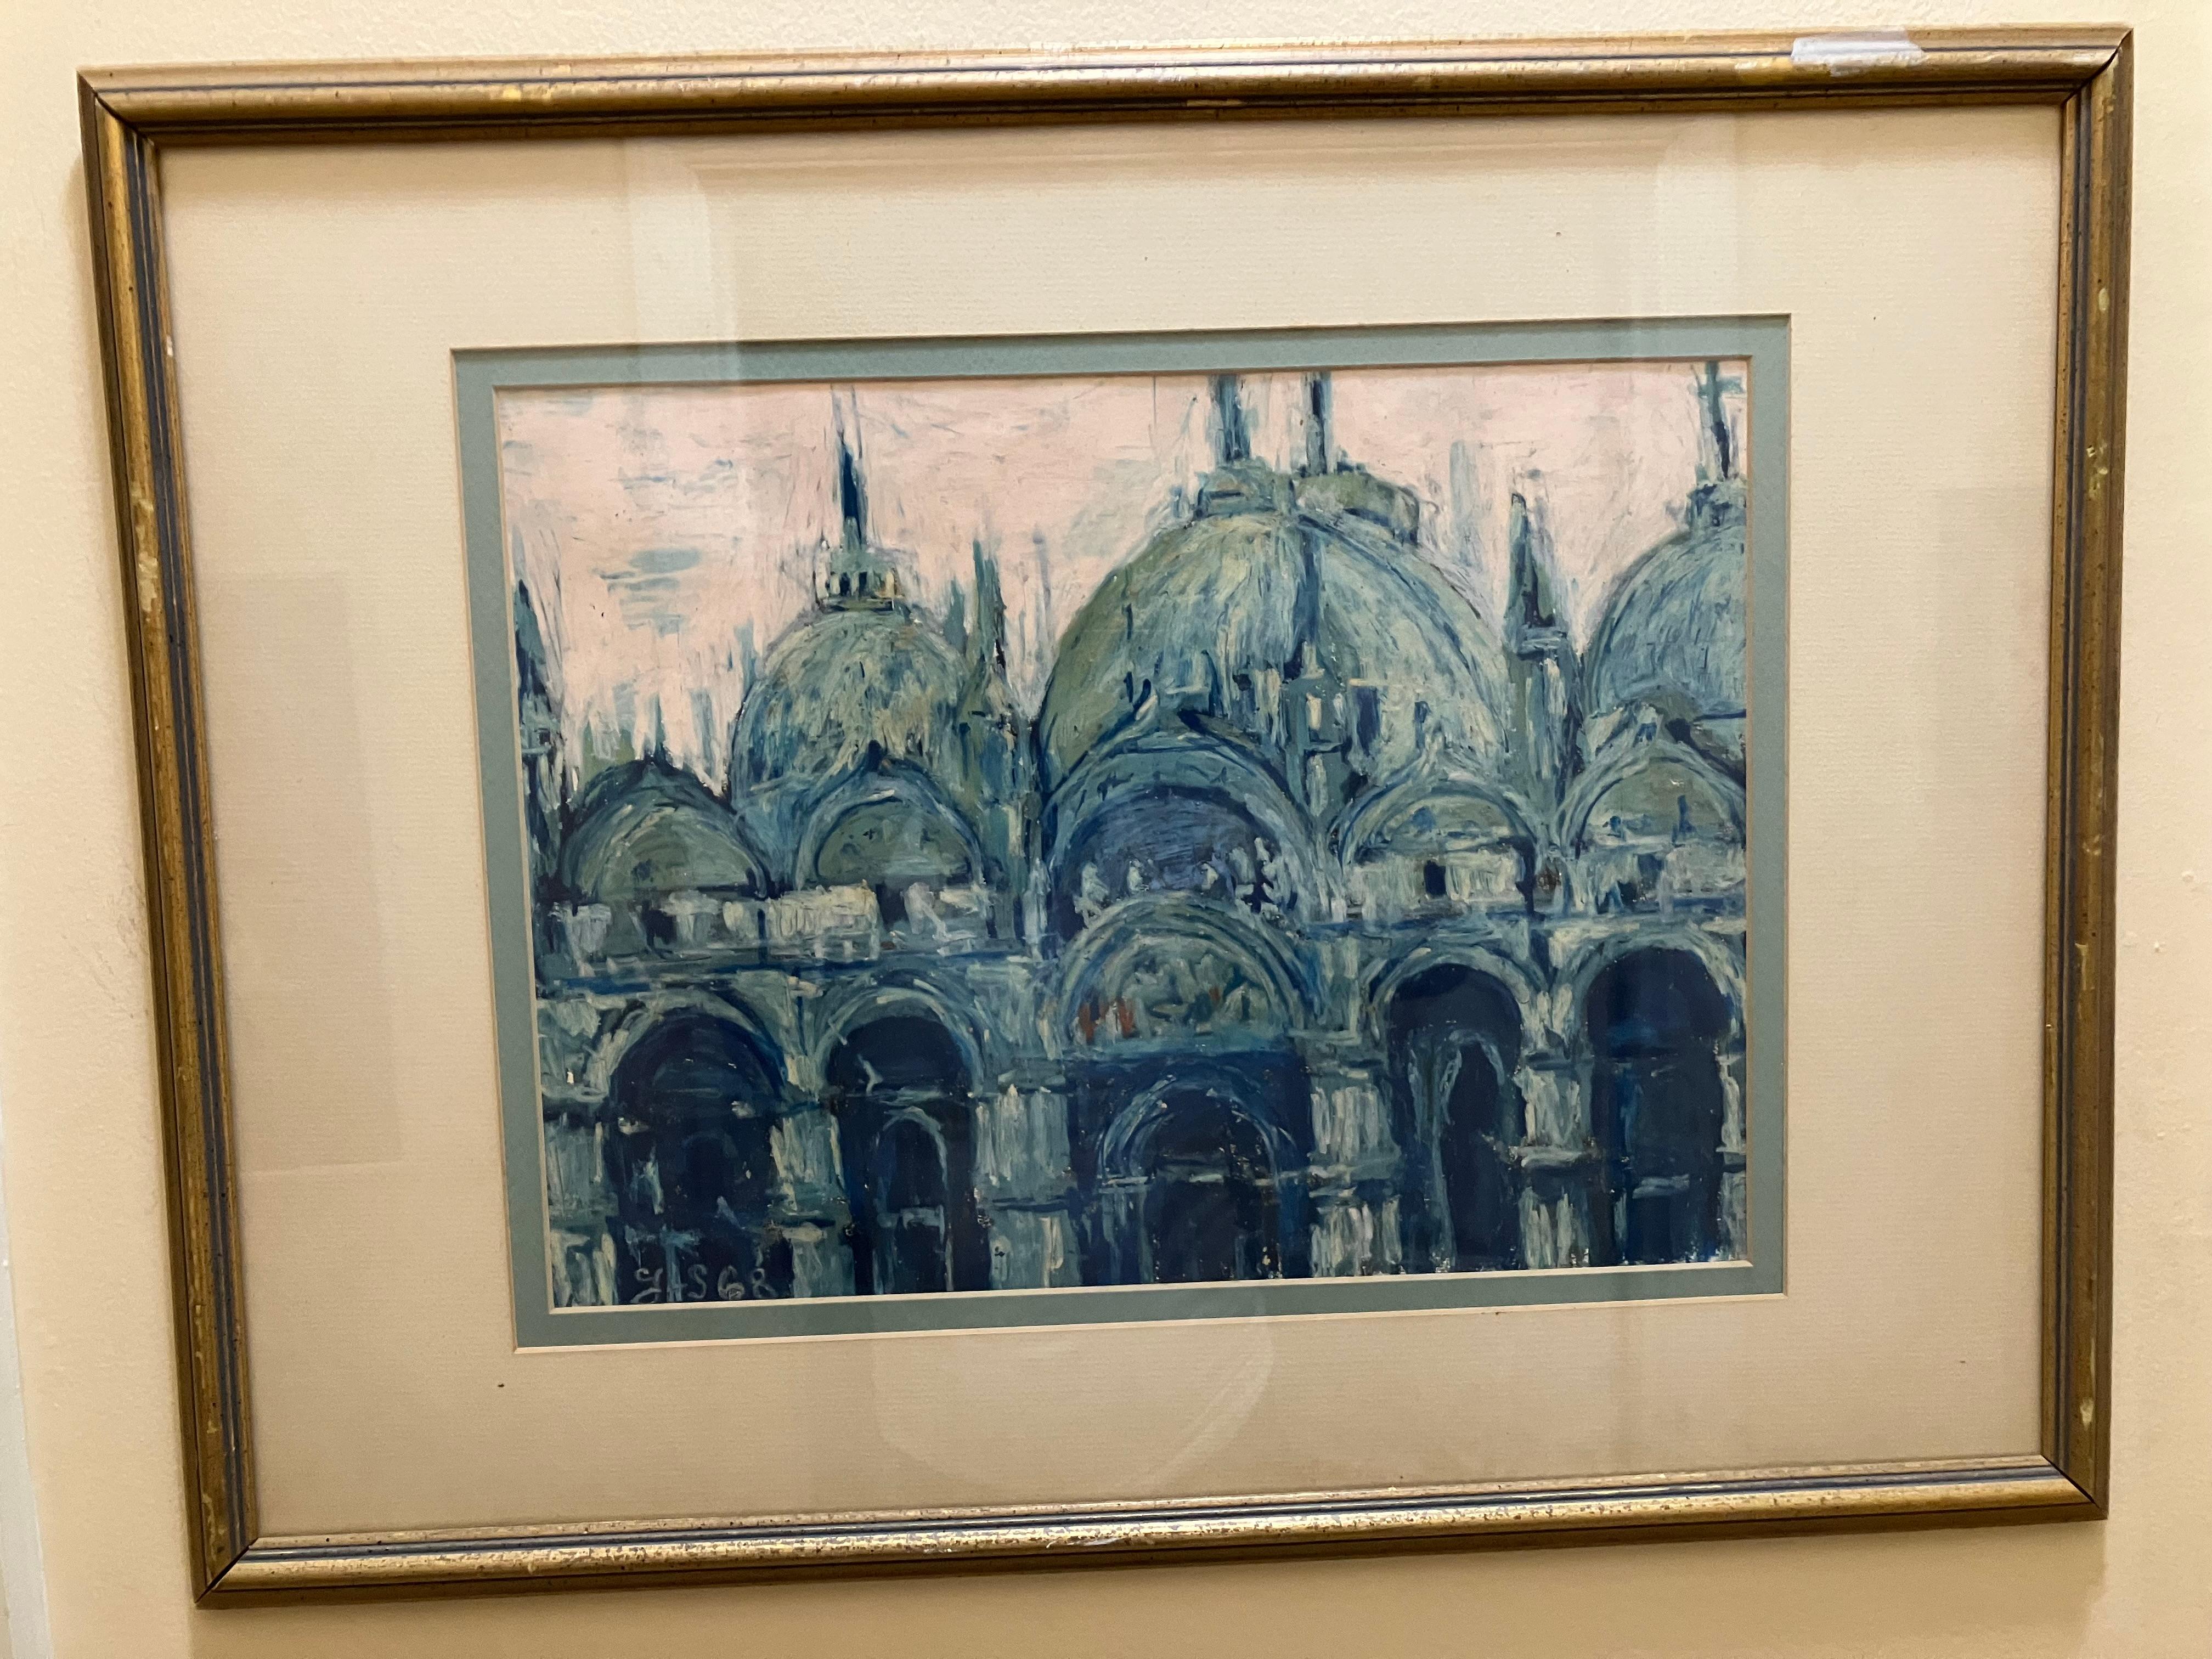 Fabulous mid century oil on board dated 1968. I am fairly sure the scene is.Piazza San Marco in Saint Marks Square, Venice. The painting seems to be initialed GS or JS not entirely sure. Painting measures 16 1/2 inches wide by 13 inches high. The